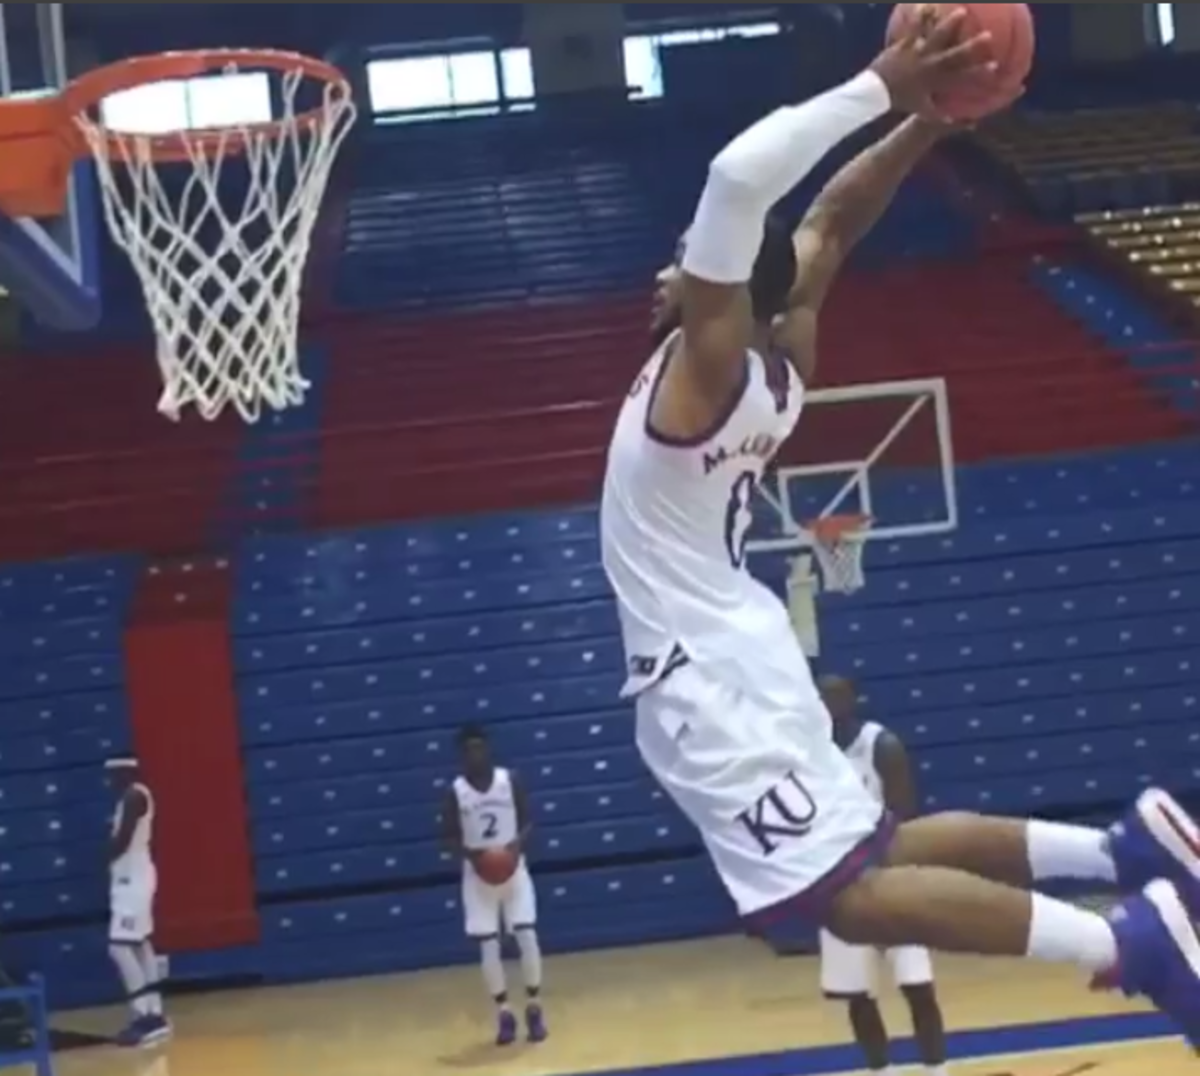 Frank Mason throwing down a dunk in practice.